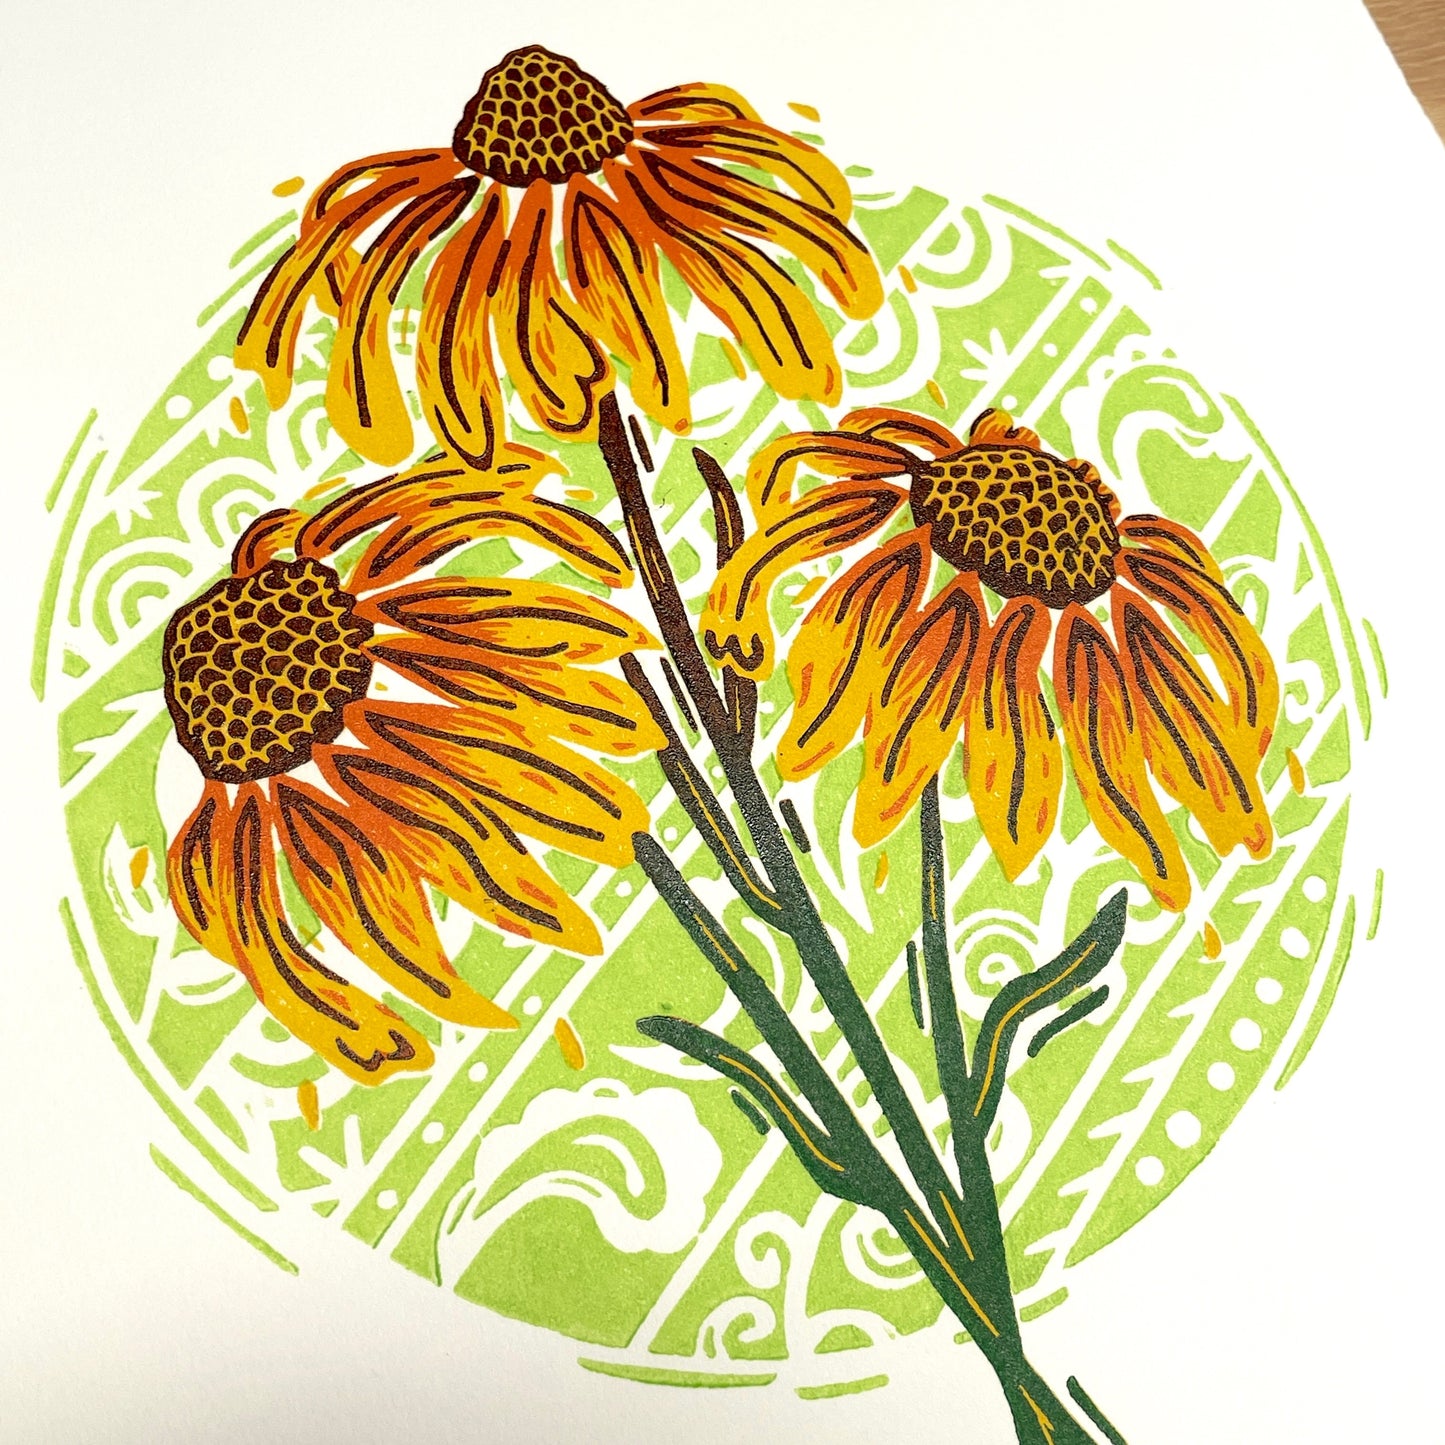 These Are For You - Black Eyed Susan Flowers - woodblock print (9x12")